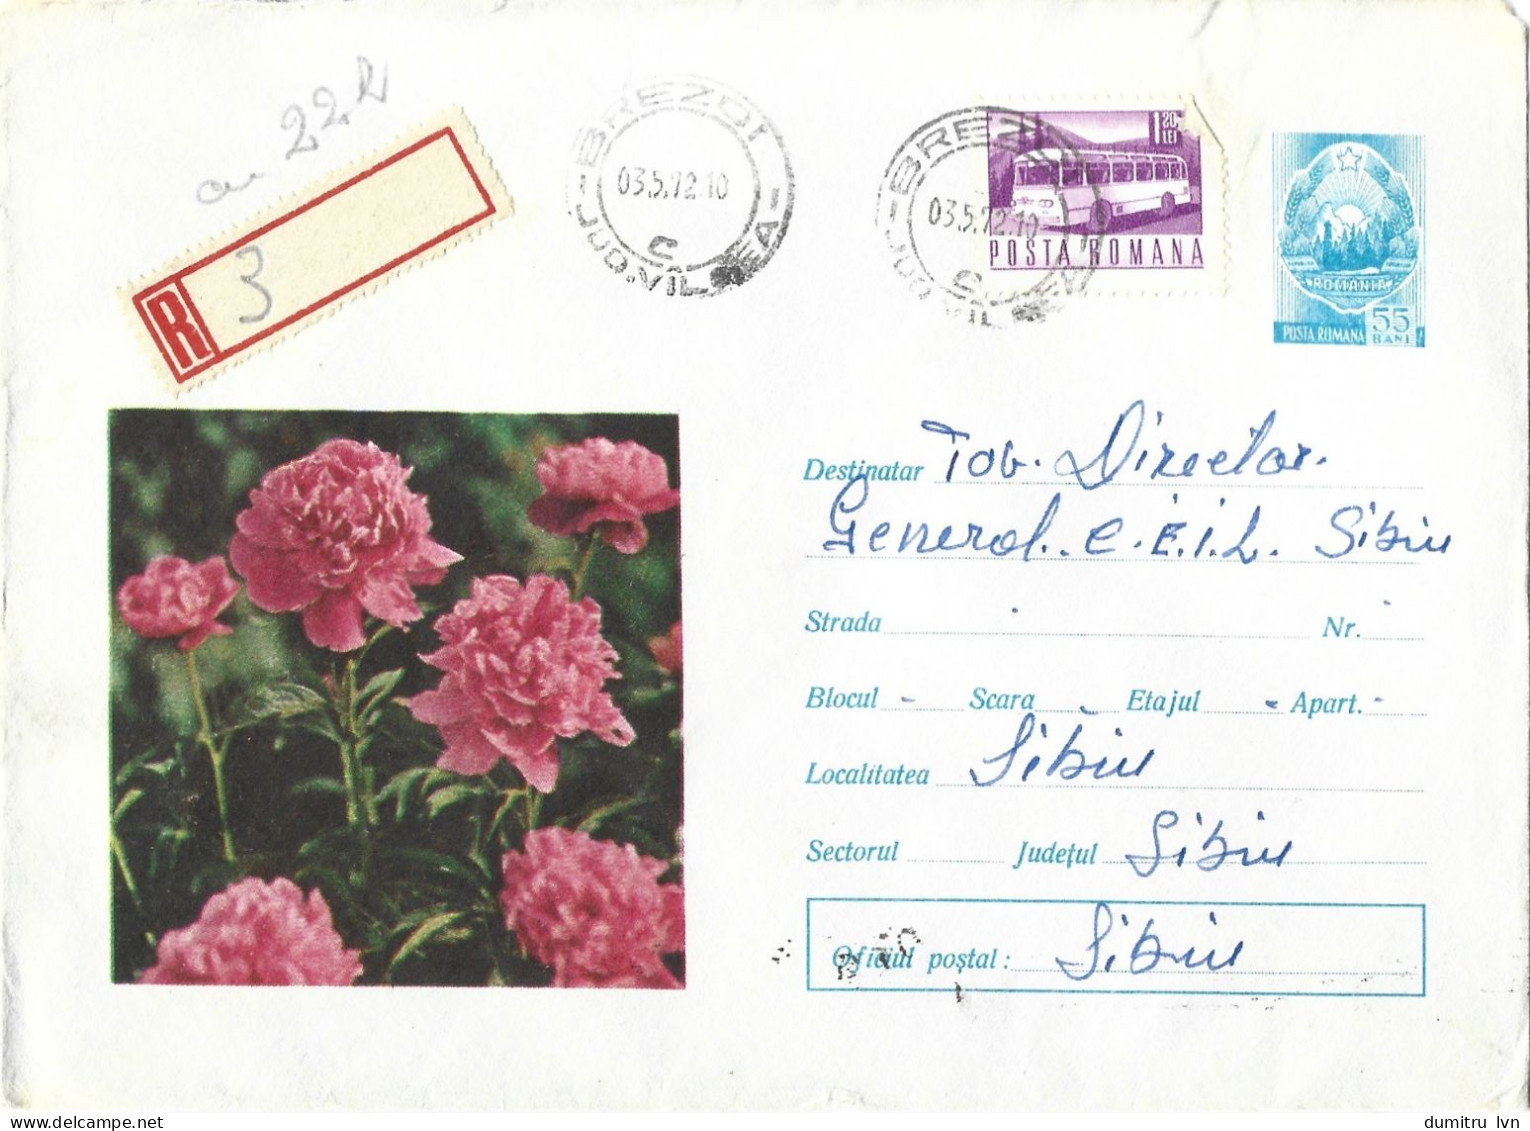 ROMANIA 1972 PEONY, CIRCULATED ENVELOPE, COVER STATIONERY - Postal Stationery